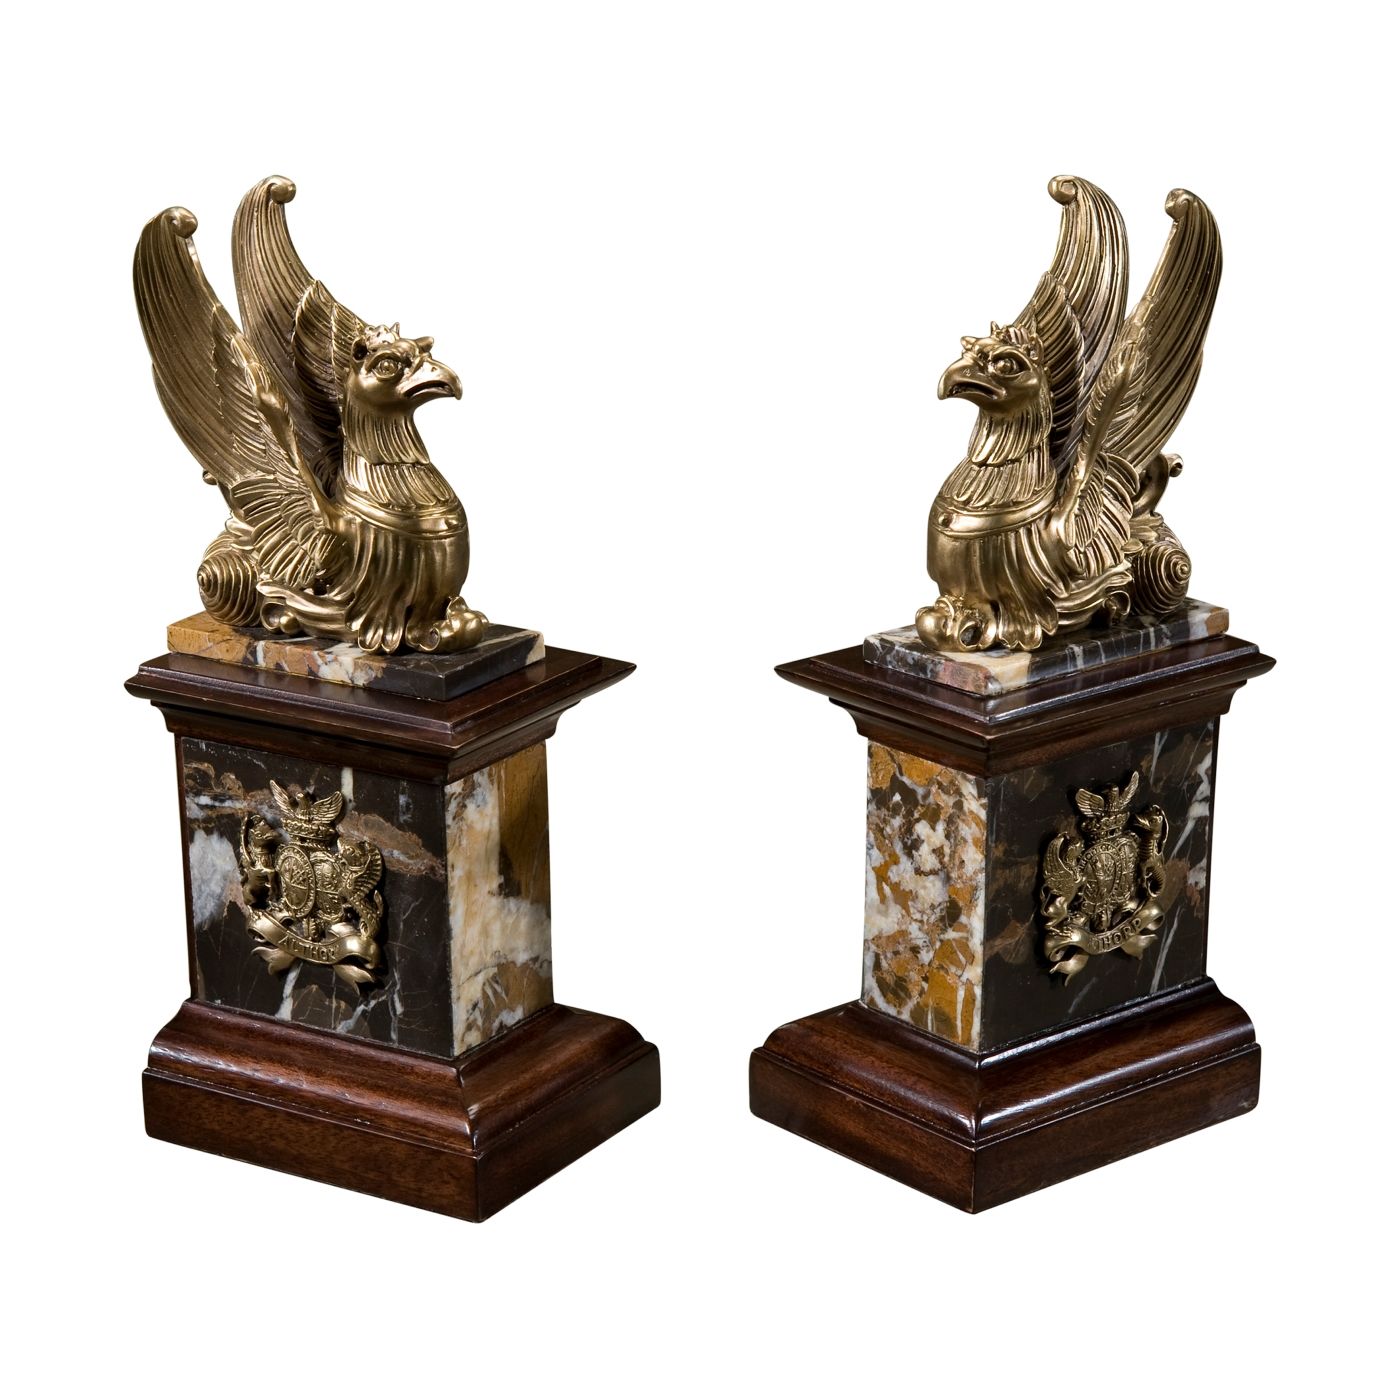 GRIFFIN BOOKEND